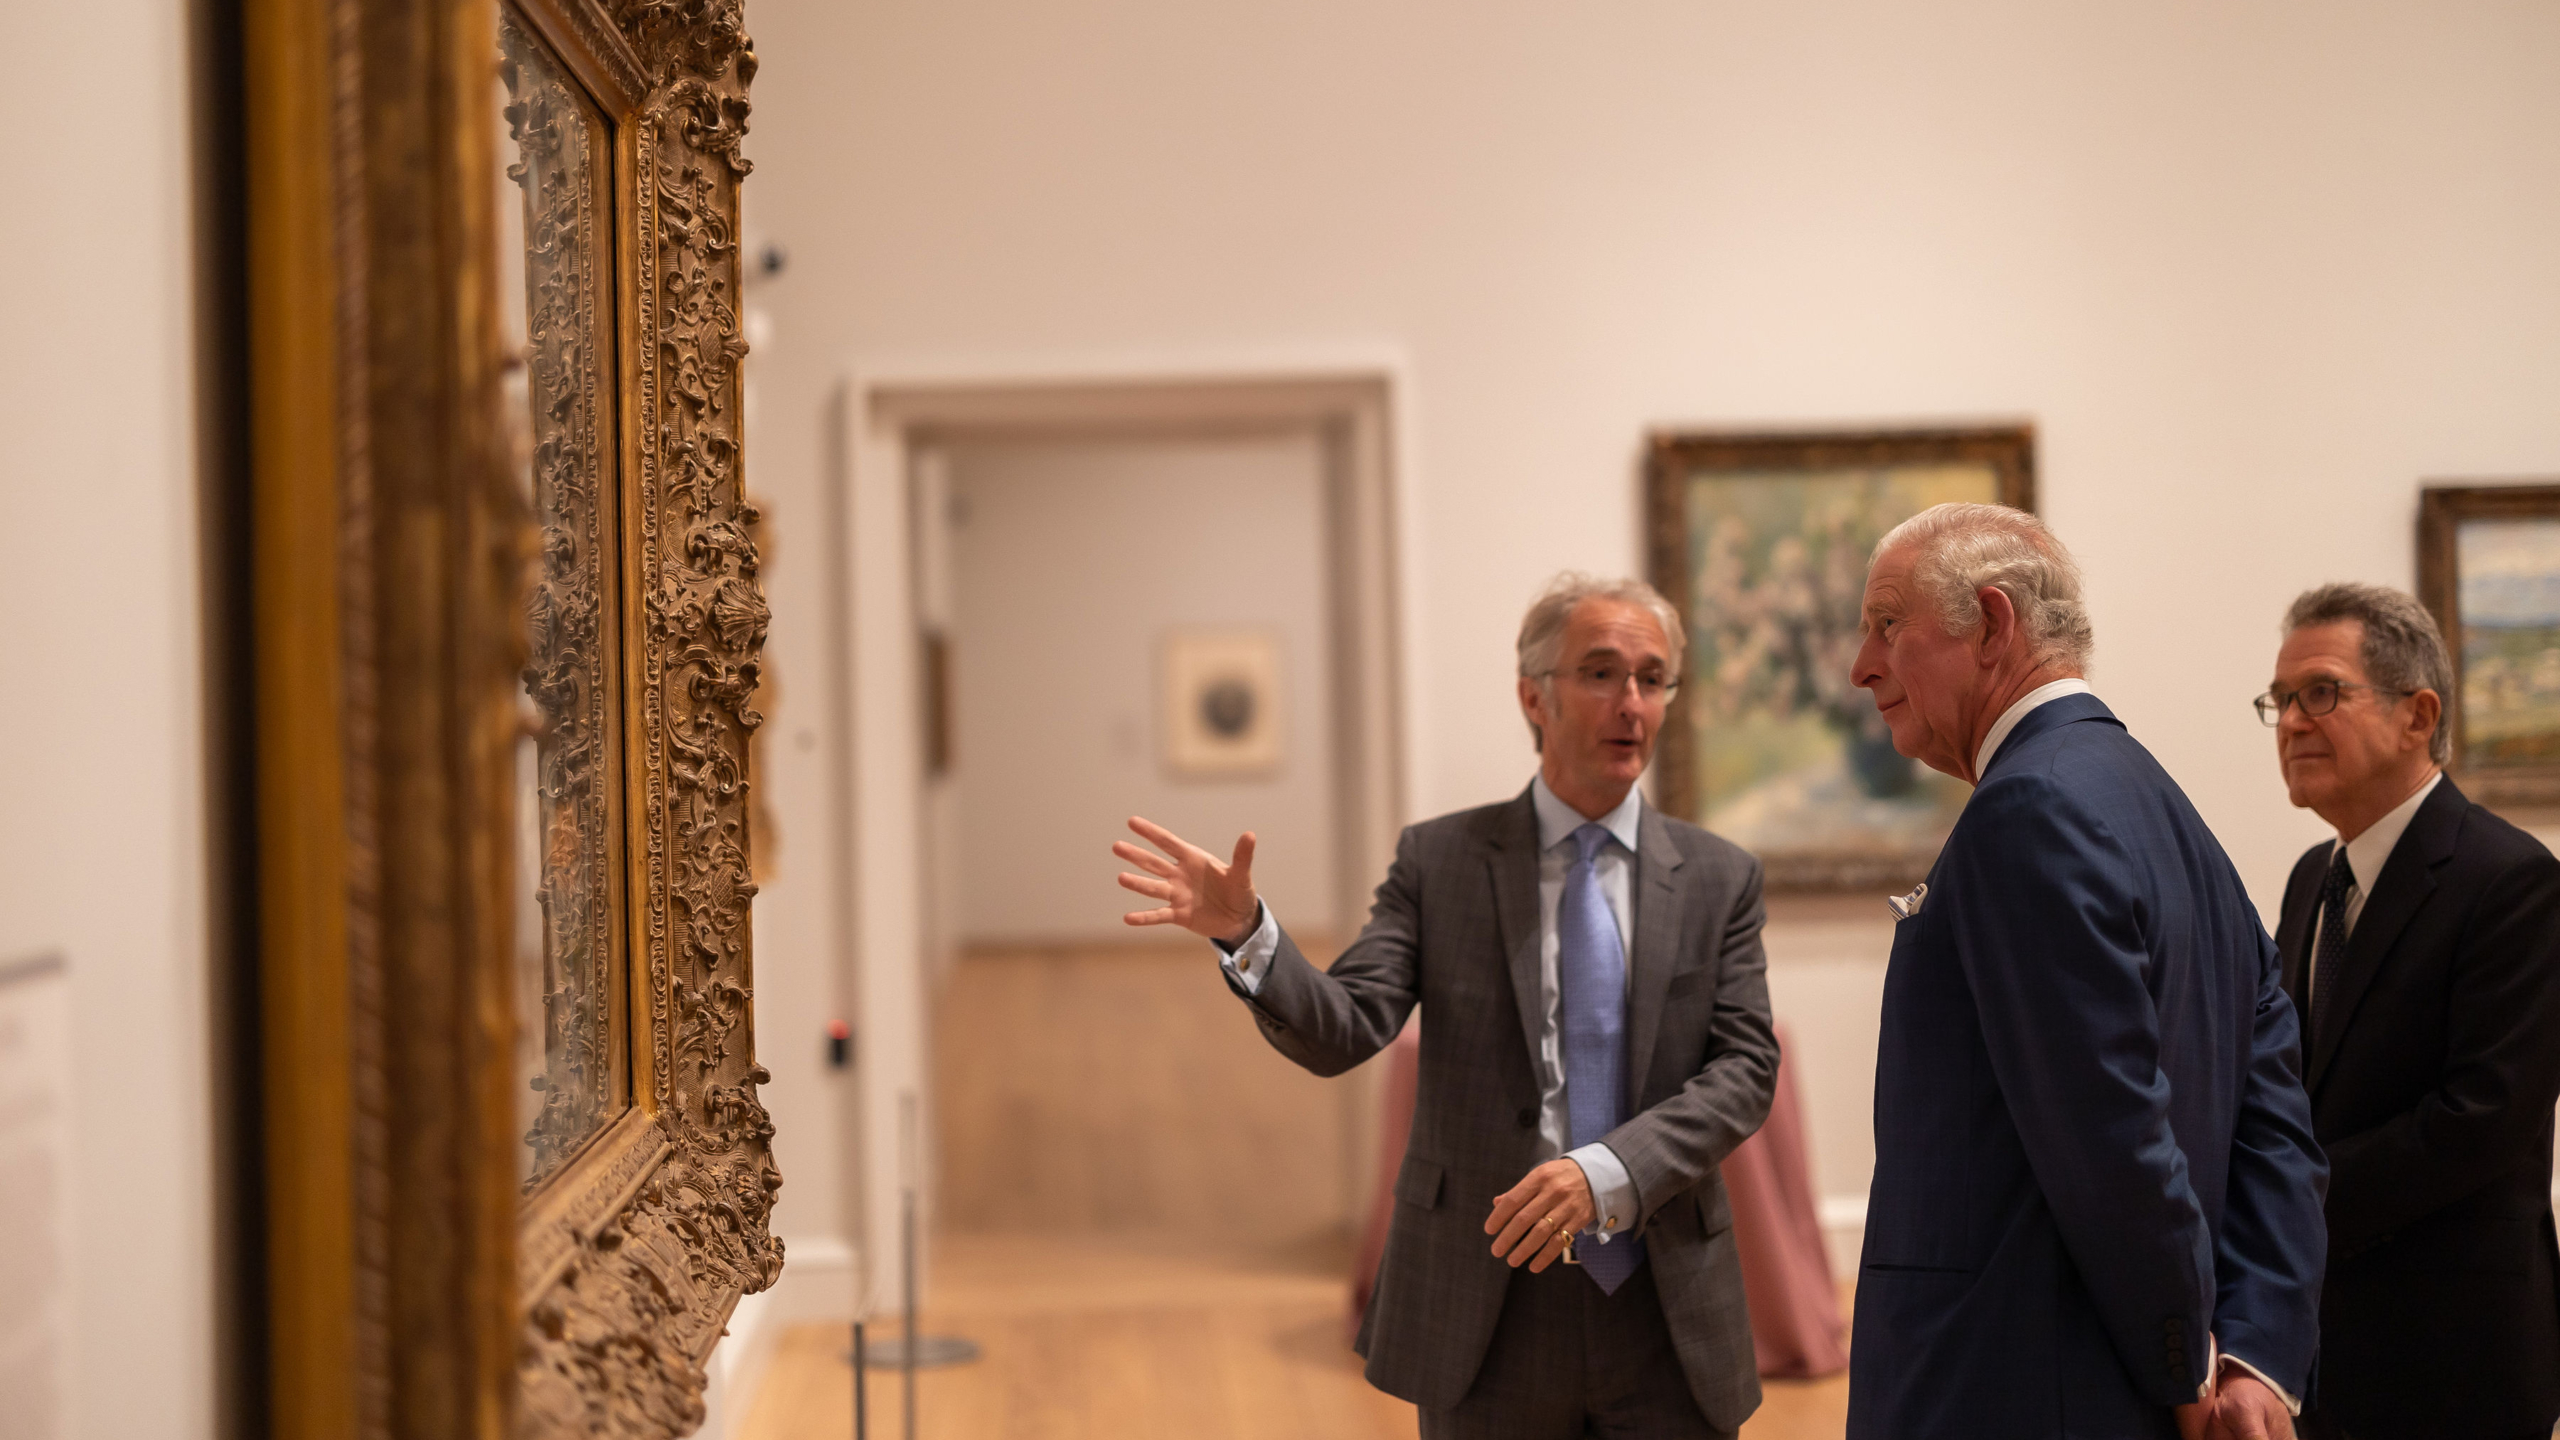 The Prince of Wales visits the Courtauld Institute of Art